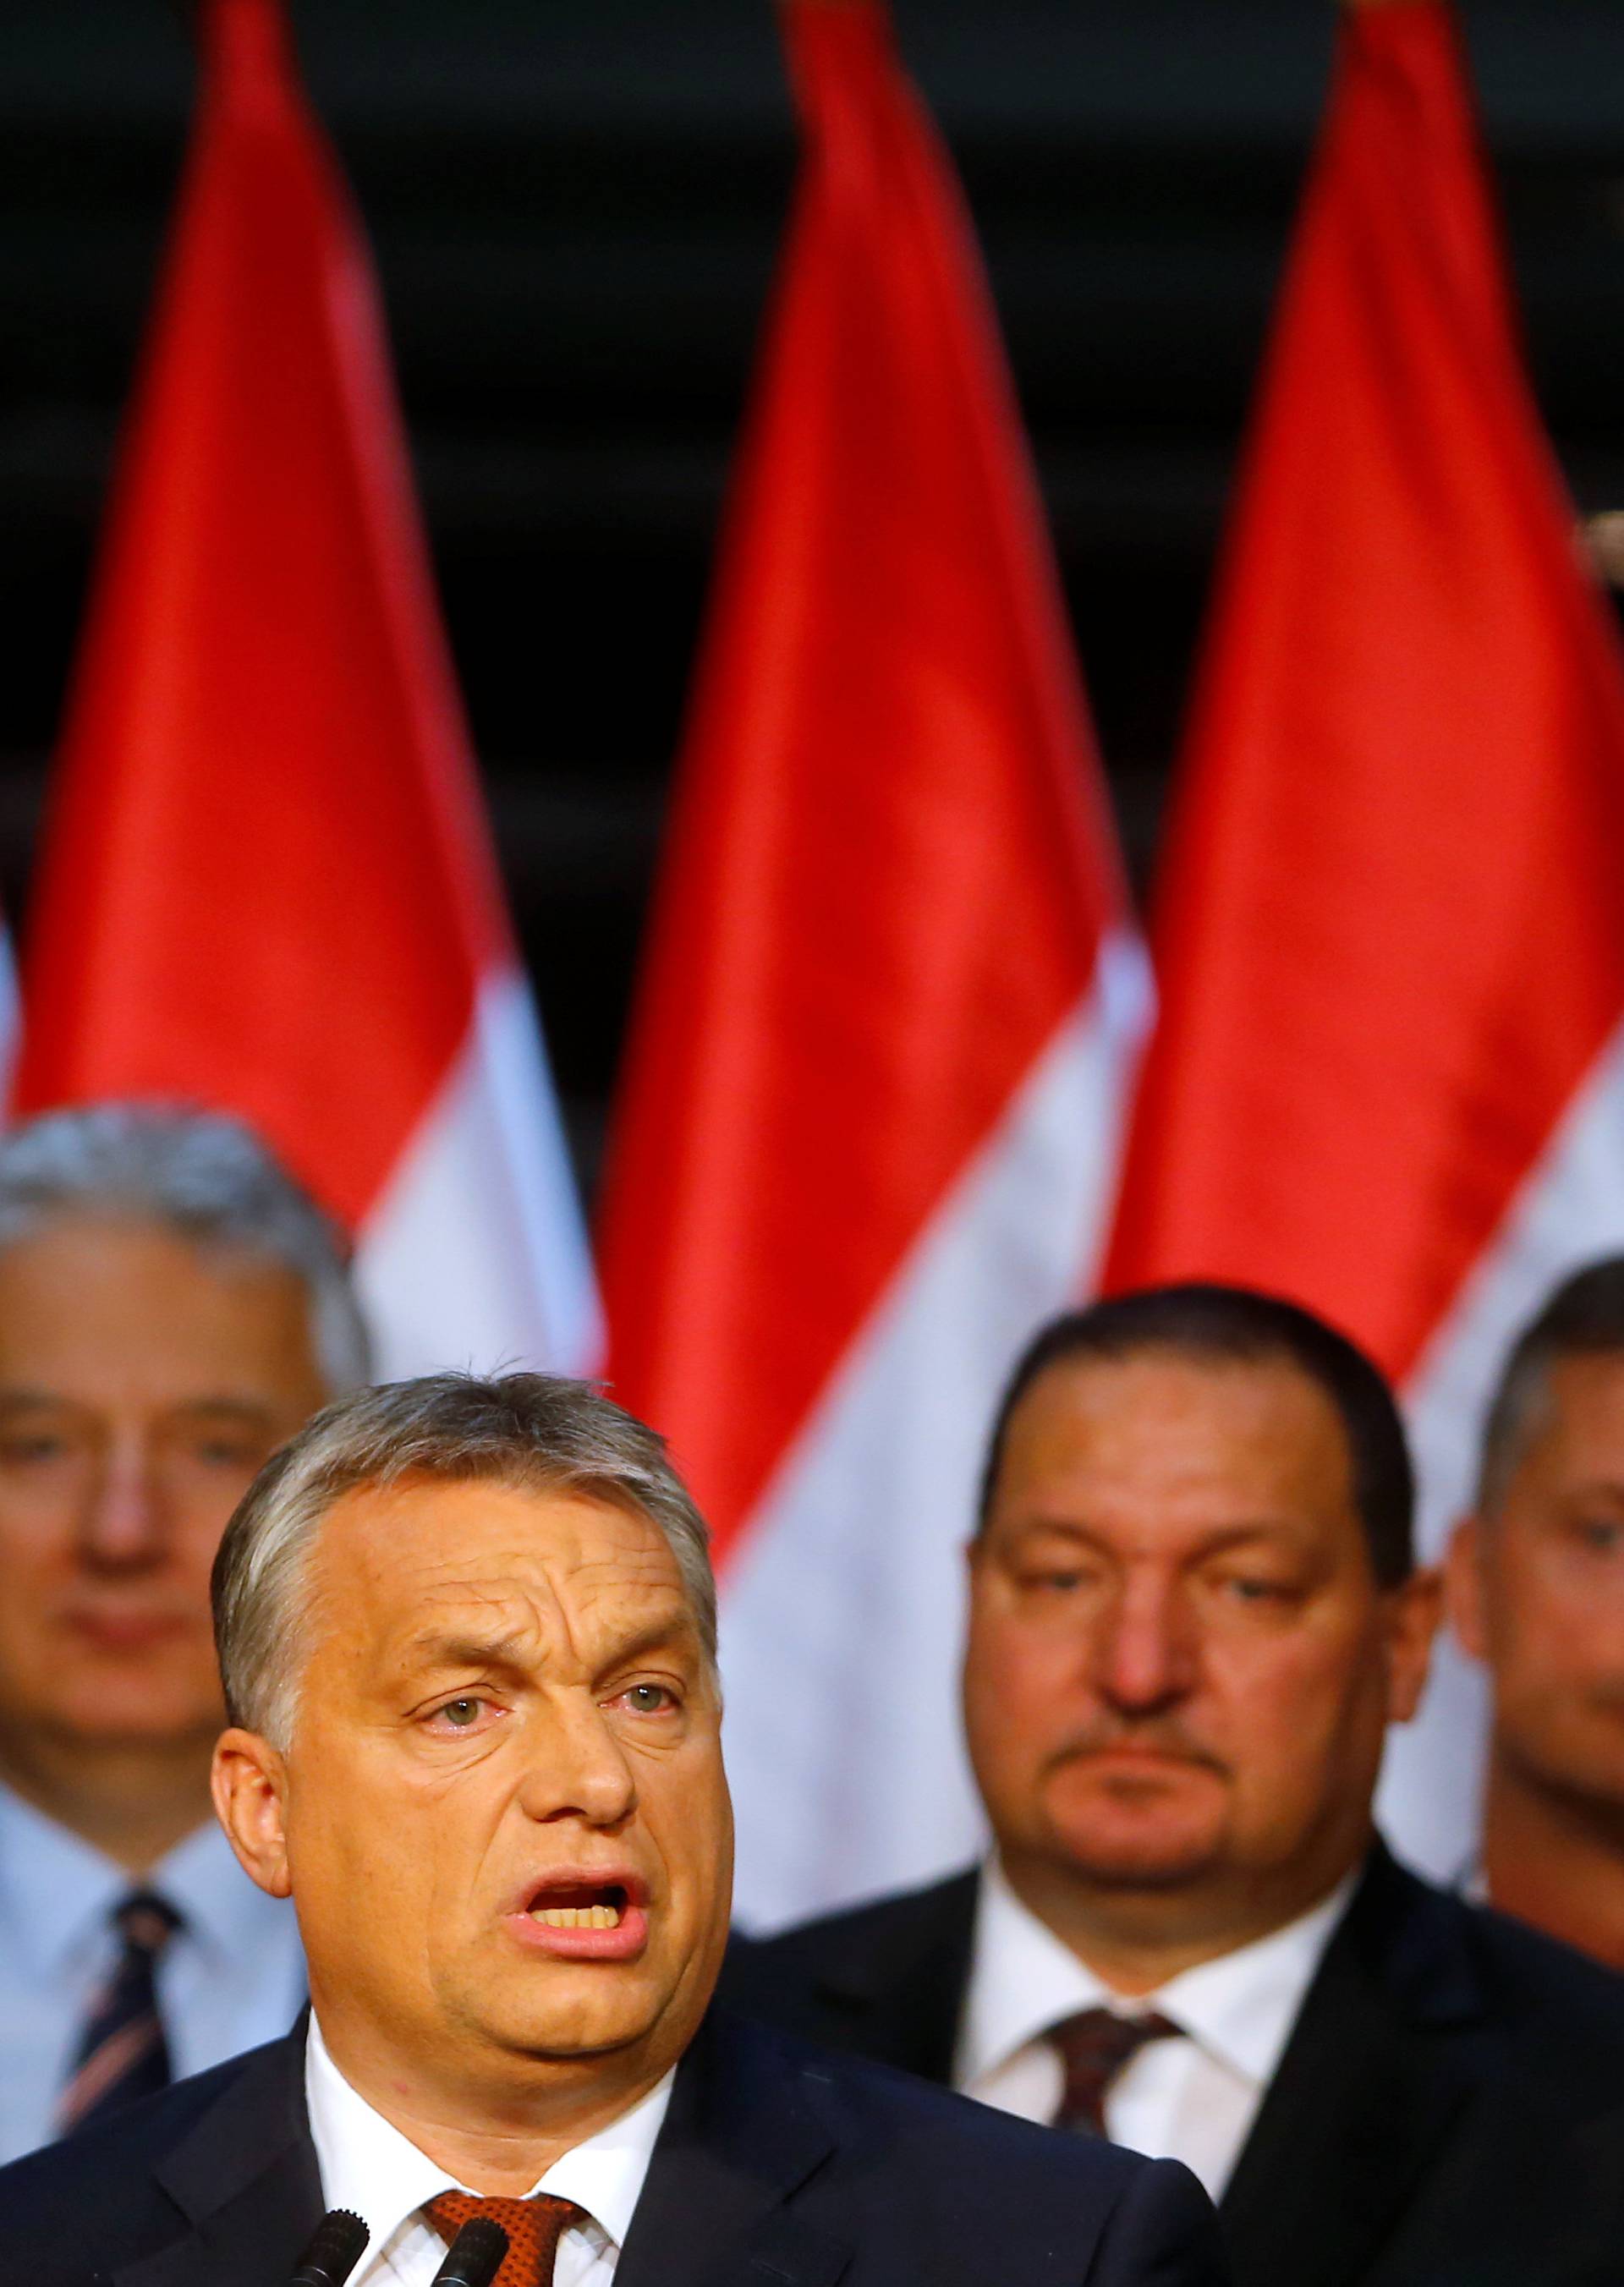 Hungarian Prime Minister Viktor Orban delivers a speech after a referendum on European Union's migrant quotas in Budapest